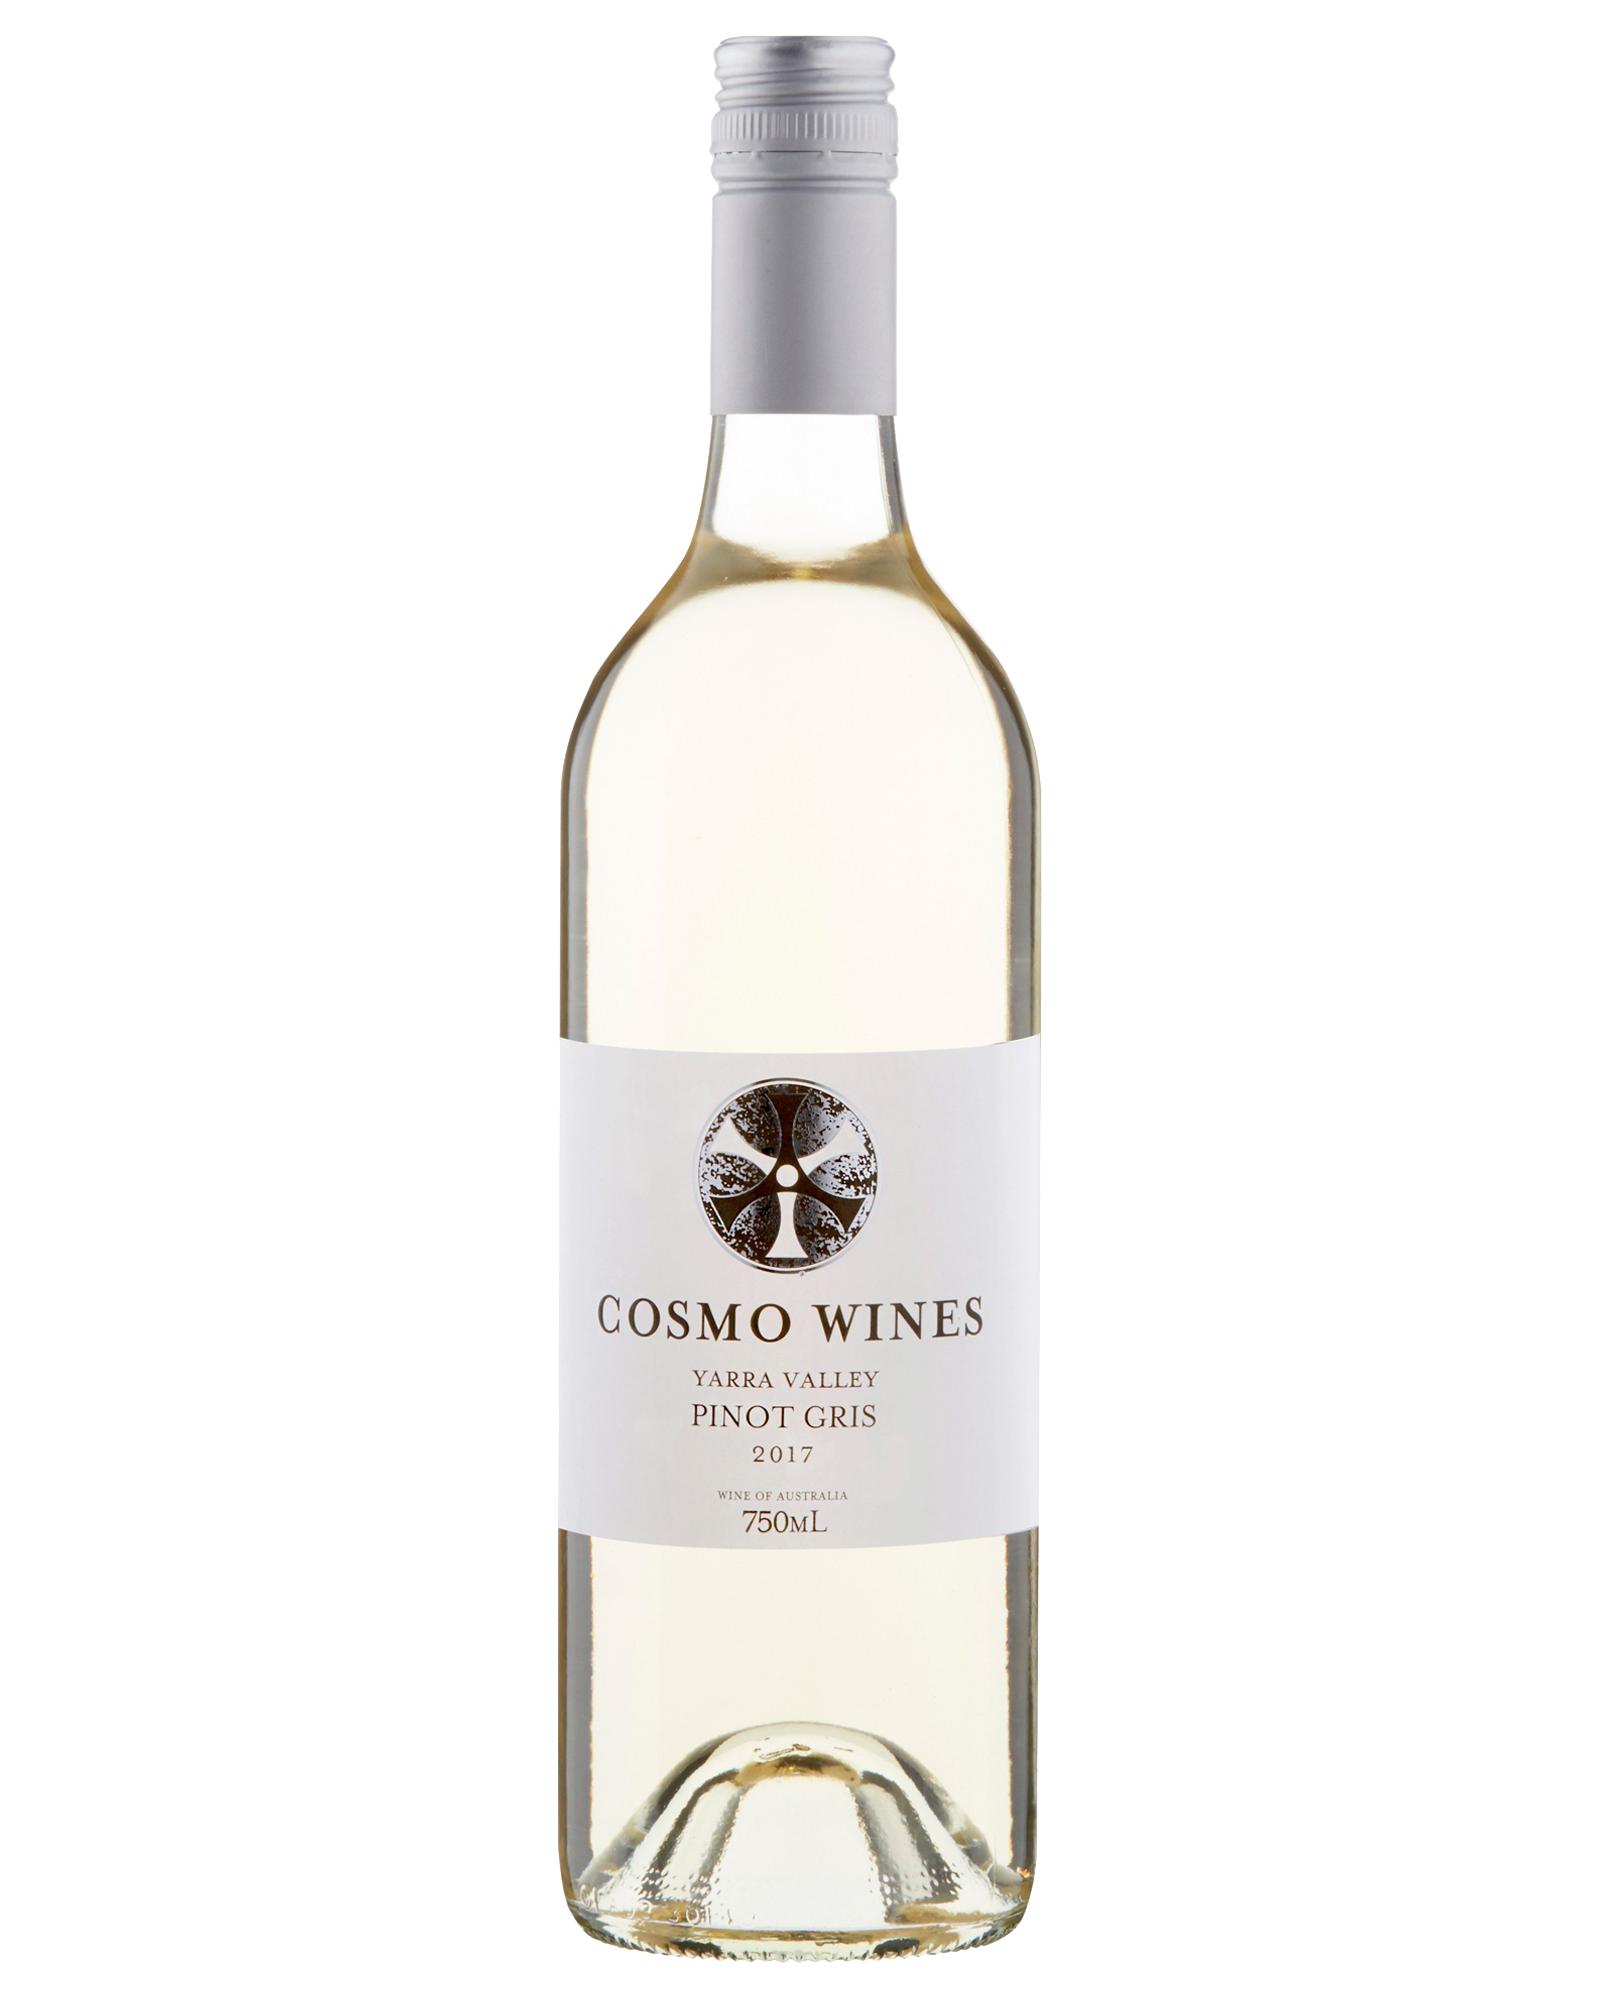 Cosmo Wines Yarra Valley Pinot Gris 2017